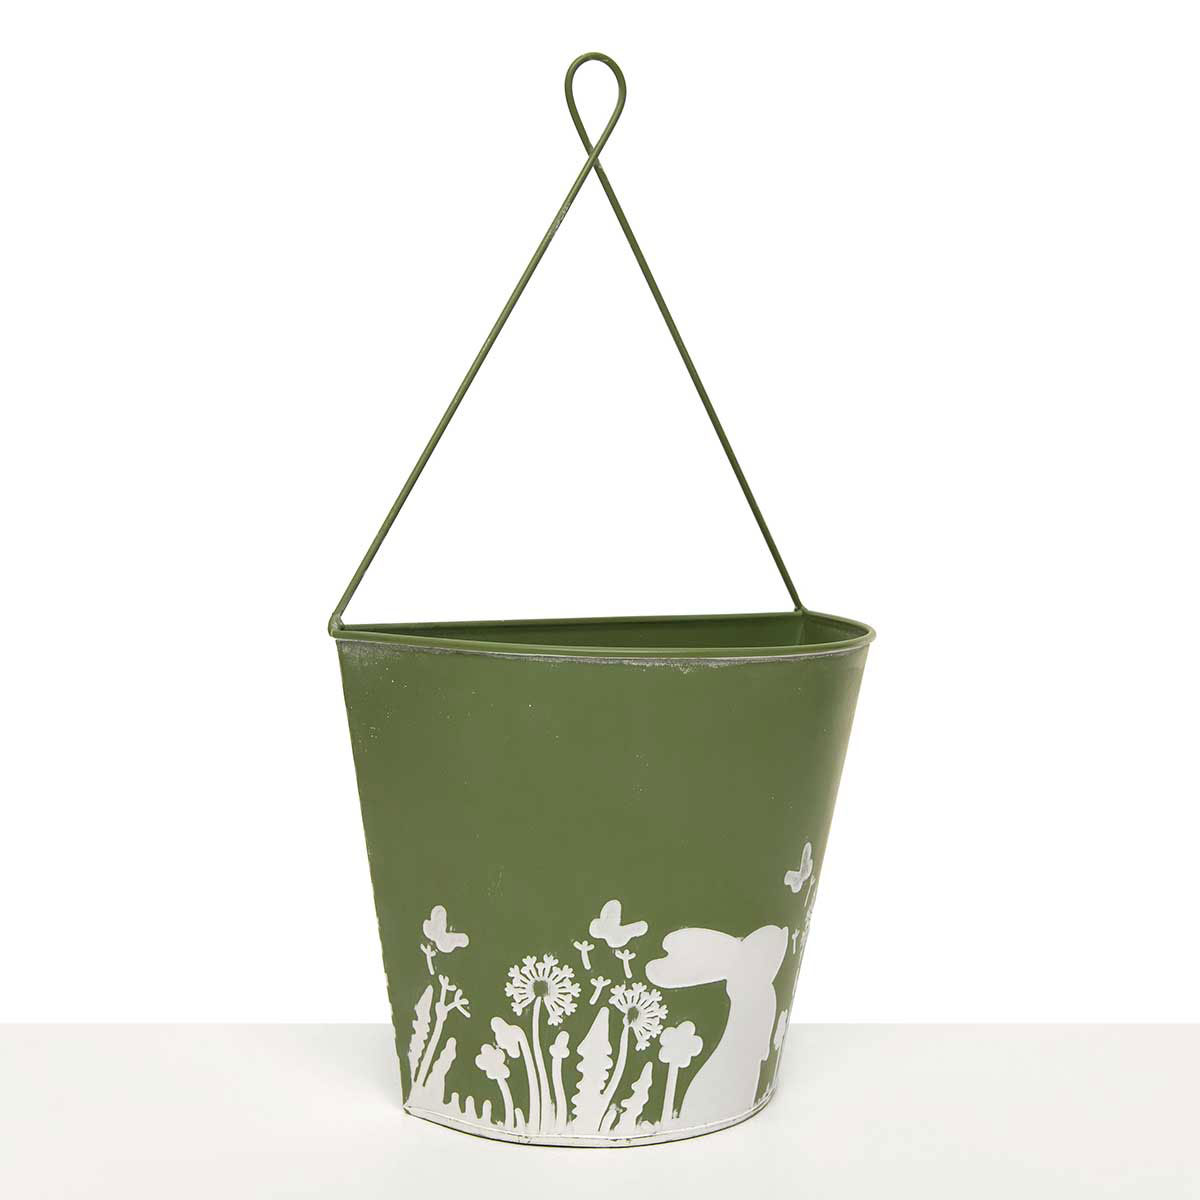 WALL PLANTER RABBIT MOTIF LARGE 8.75IN X 4.75IN X 16.5IN GREEN